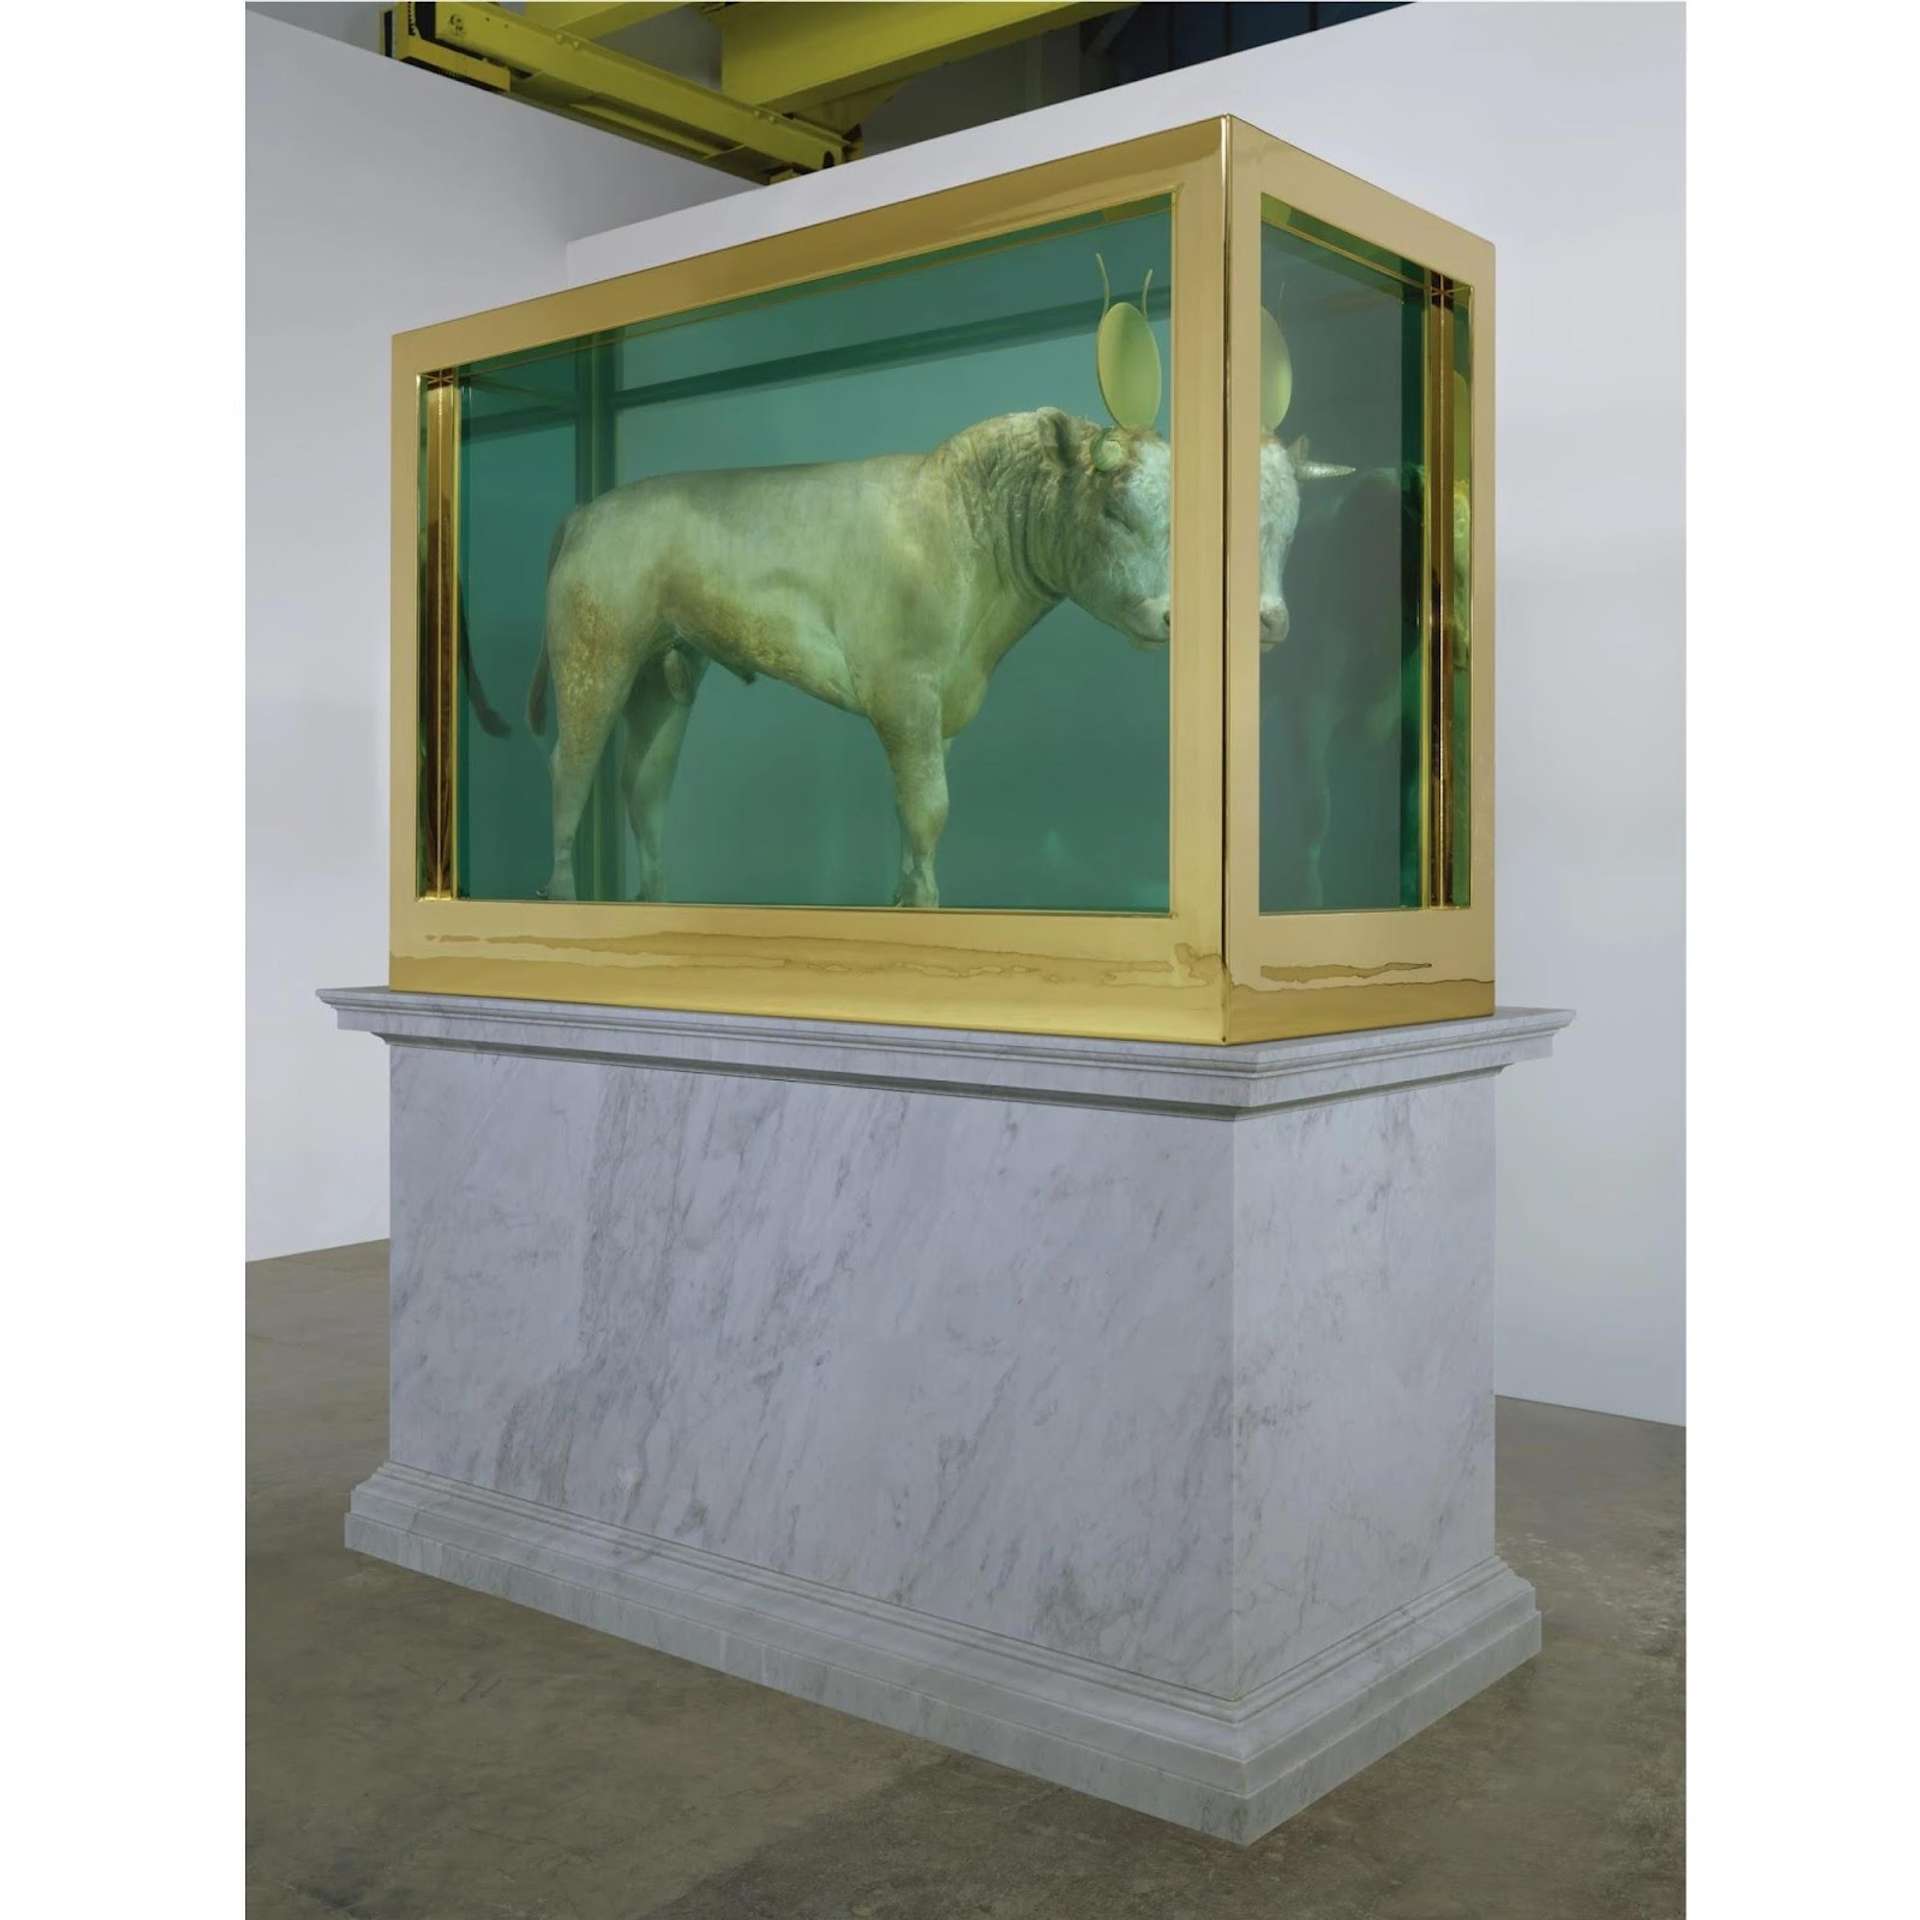 An image of the artwork The Golden Calf by Damien Hirst. It is composed of a calf, whose horns have been painted gold, immersed in formaldehyde. The tank containing the animal is atop a marble plinth.